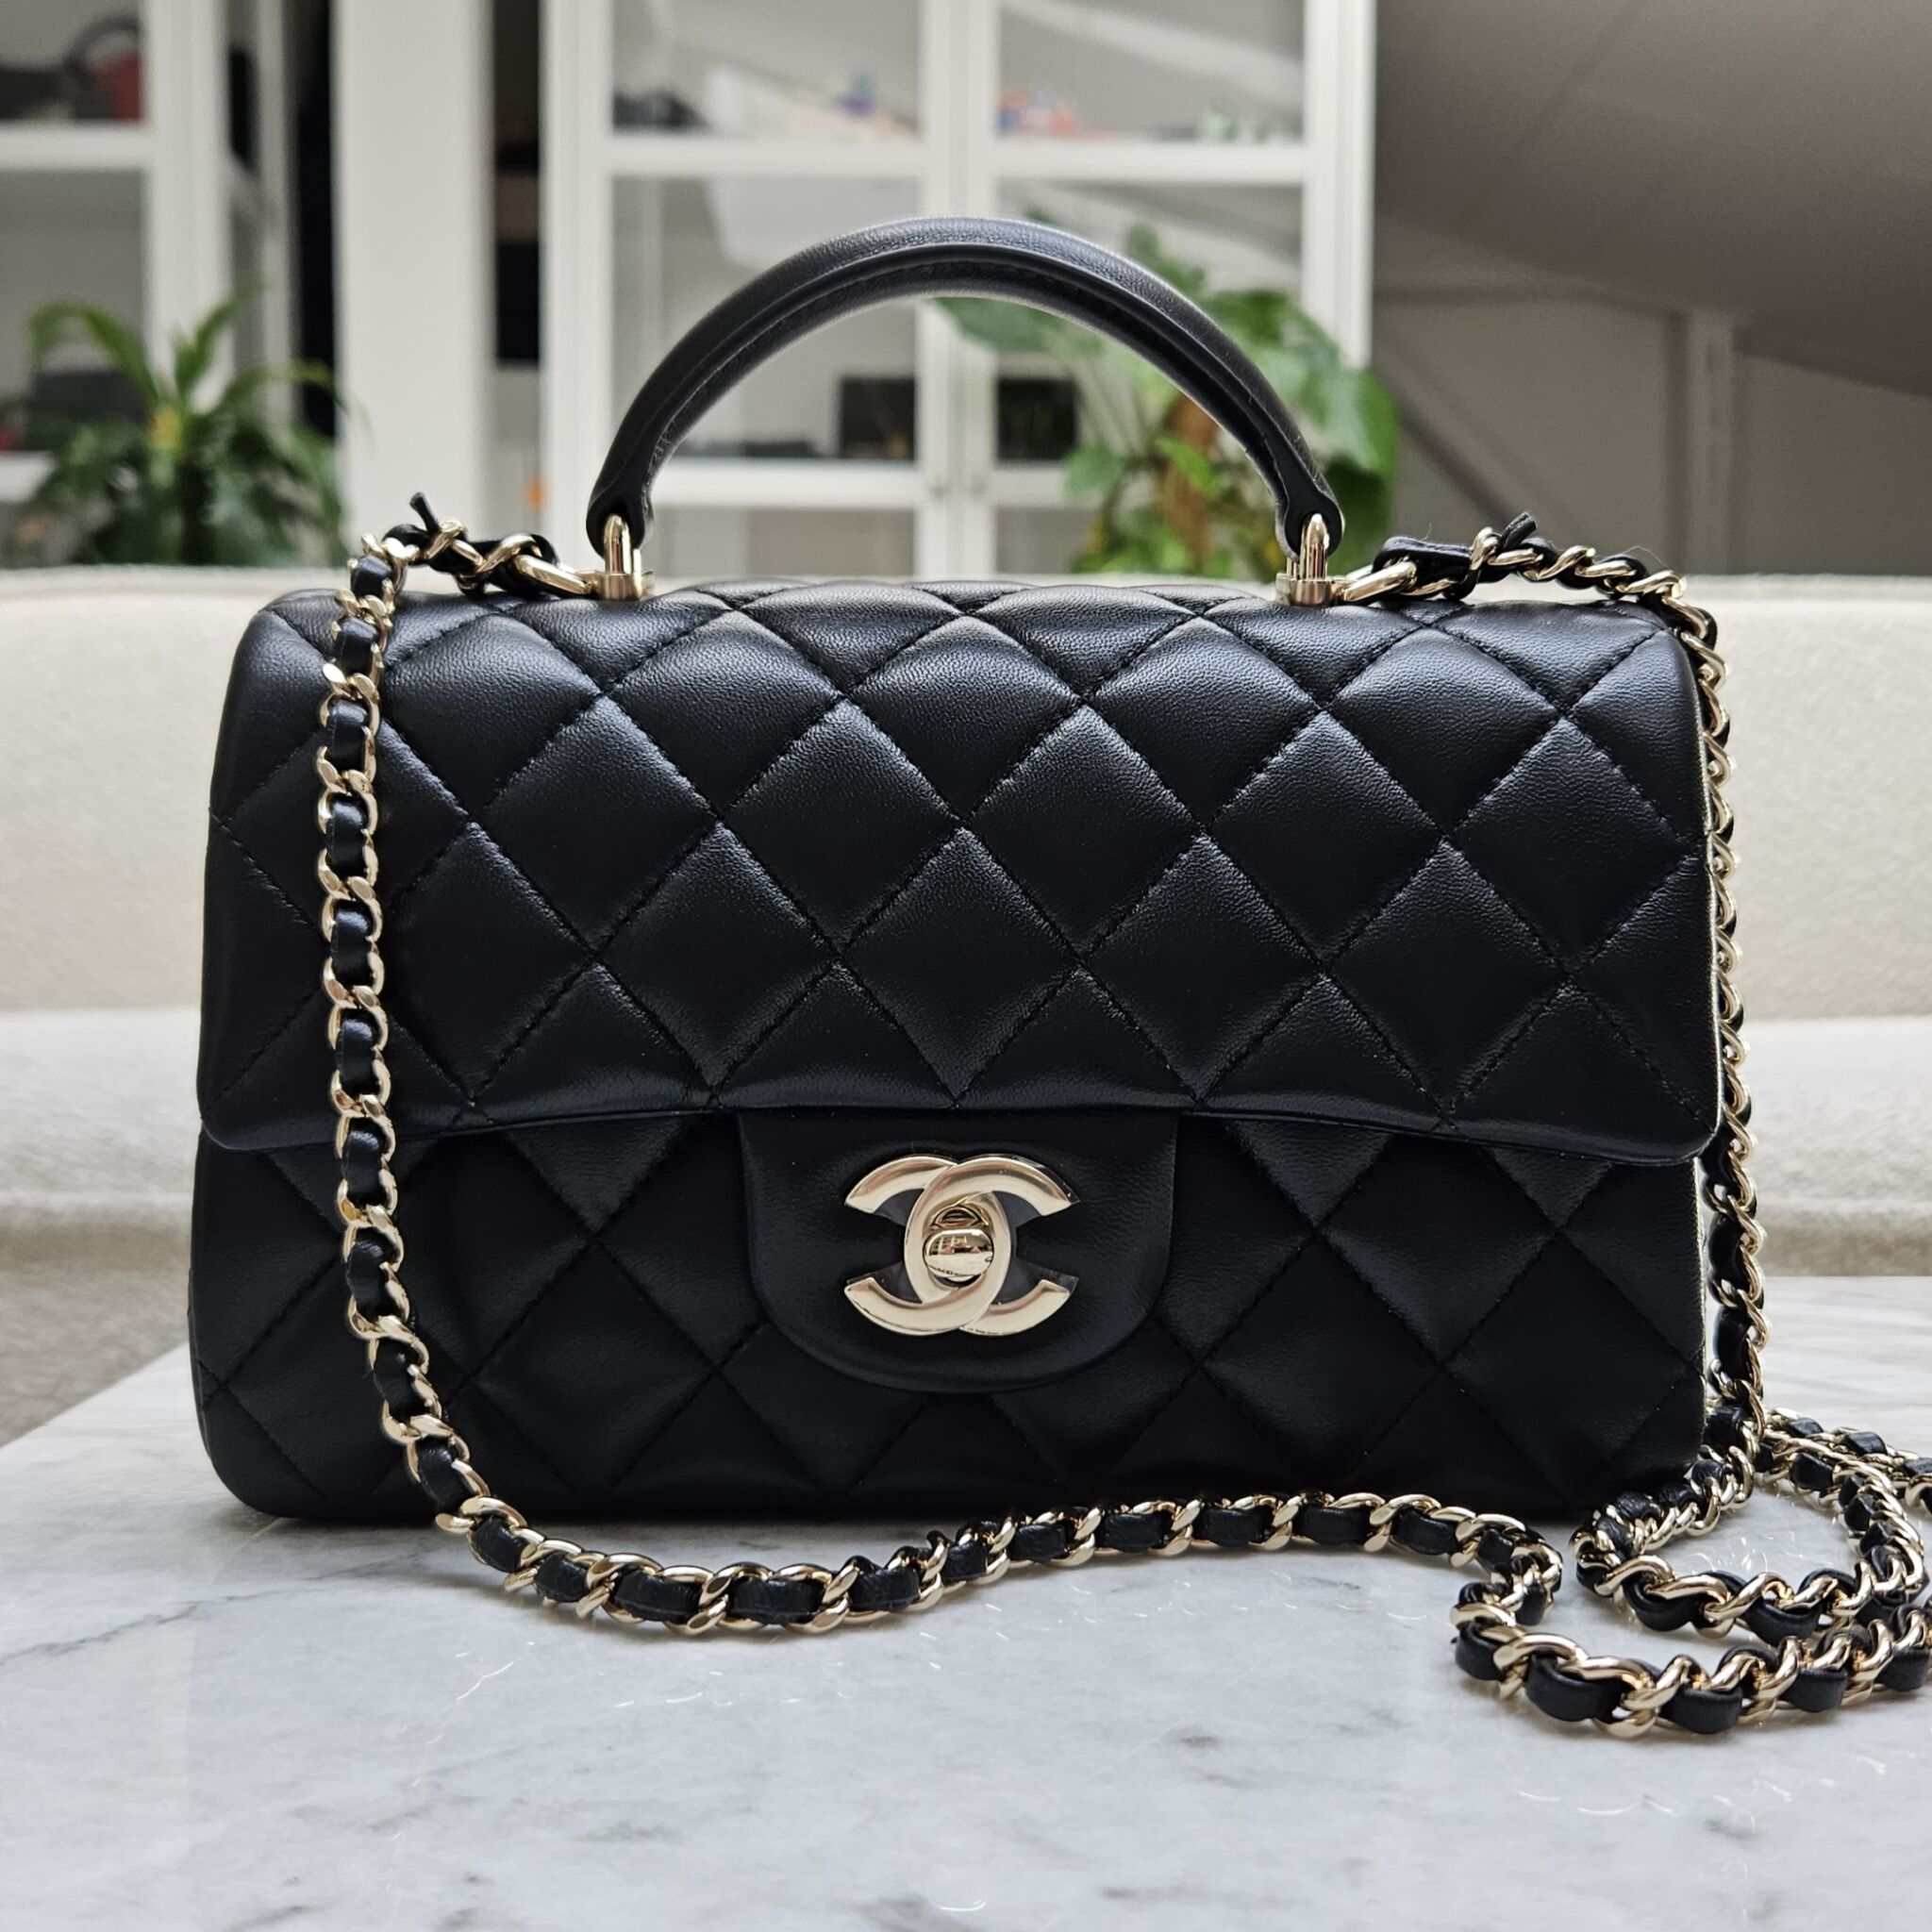 Chanel mini flap bag with top handle